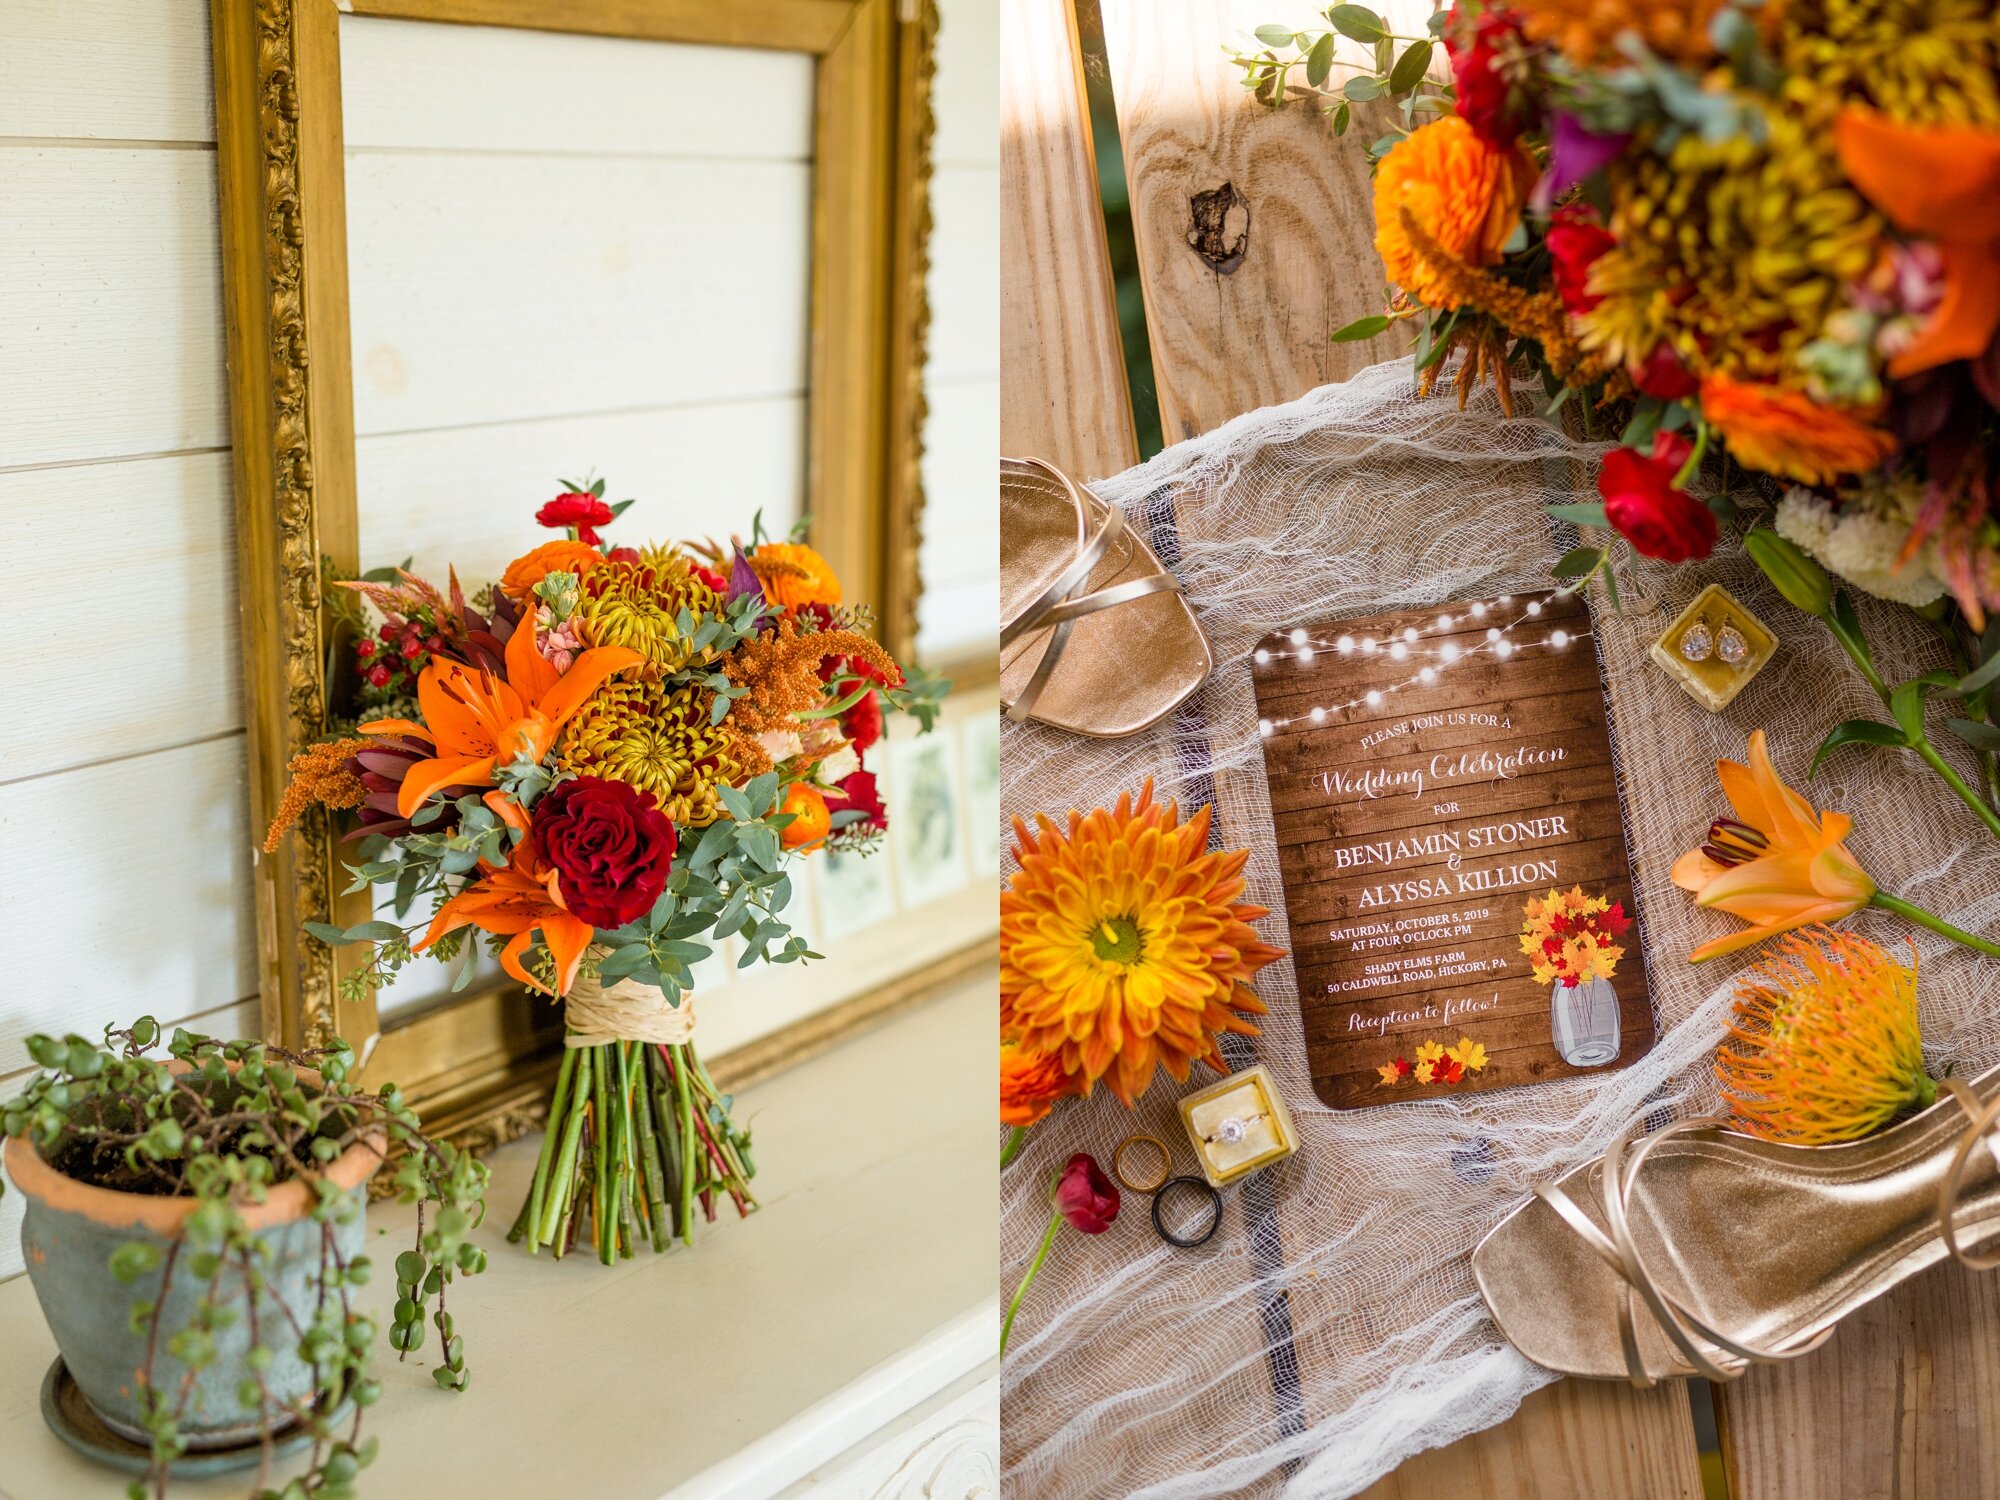  Bright and colorful weddings are always some of my favorites! Alyssa and Ben had THE most beautiful details. Bouquet is by Shady Elms Farm! 